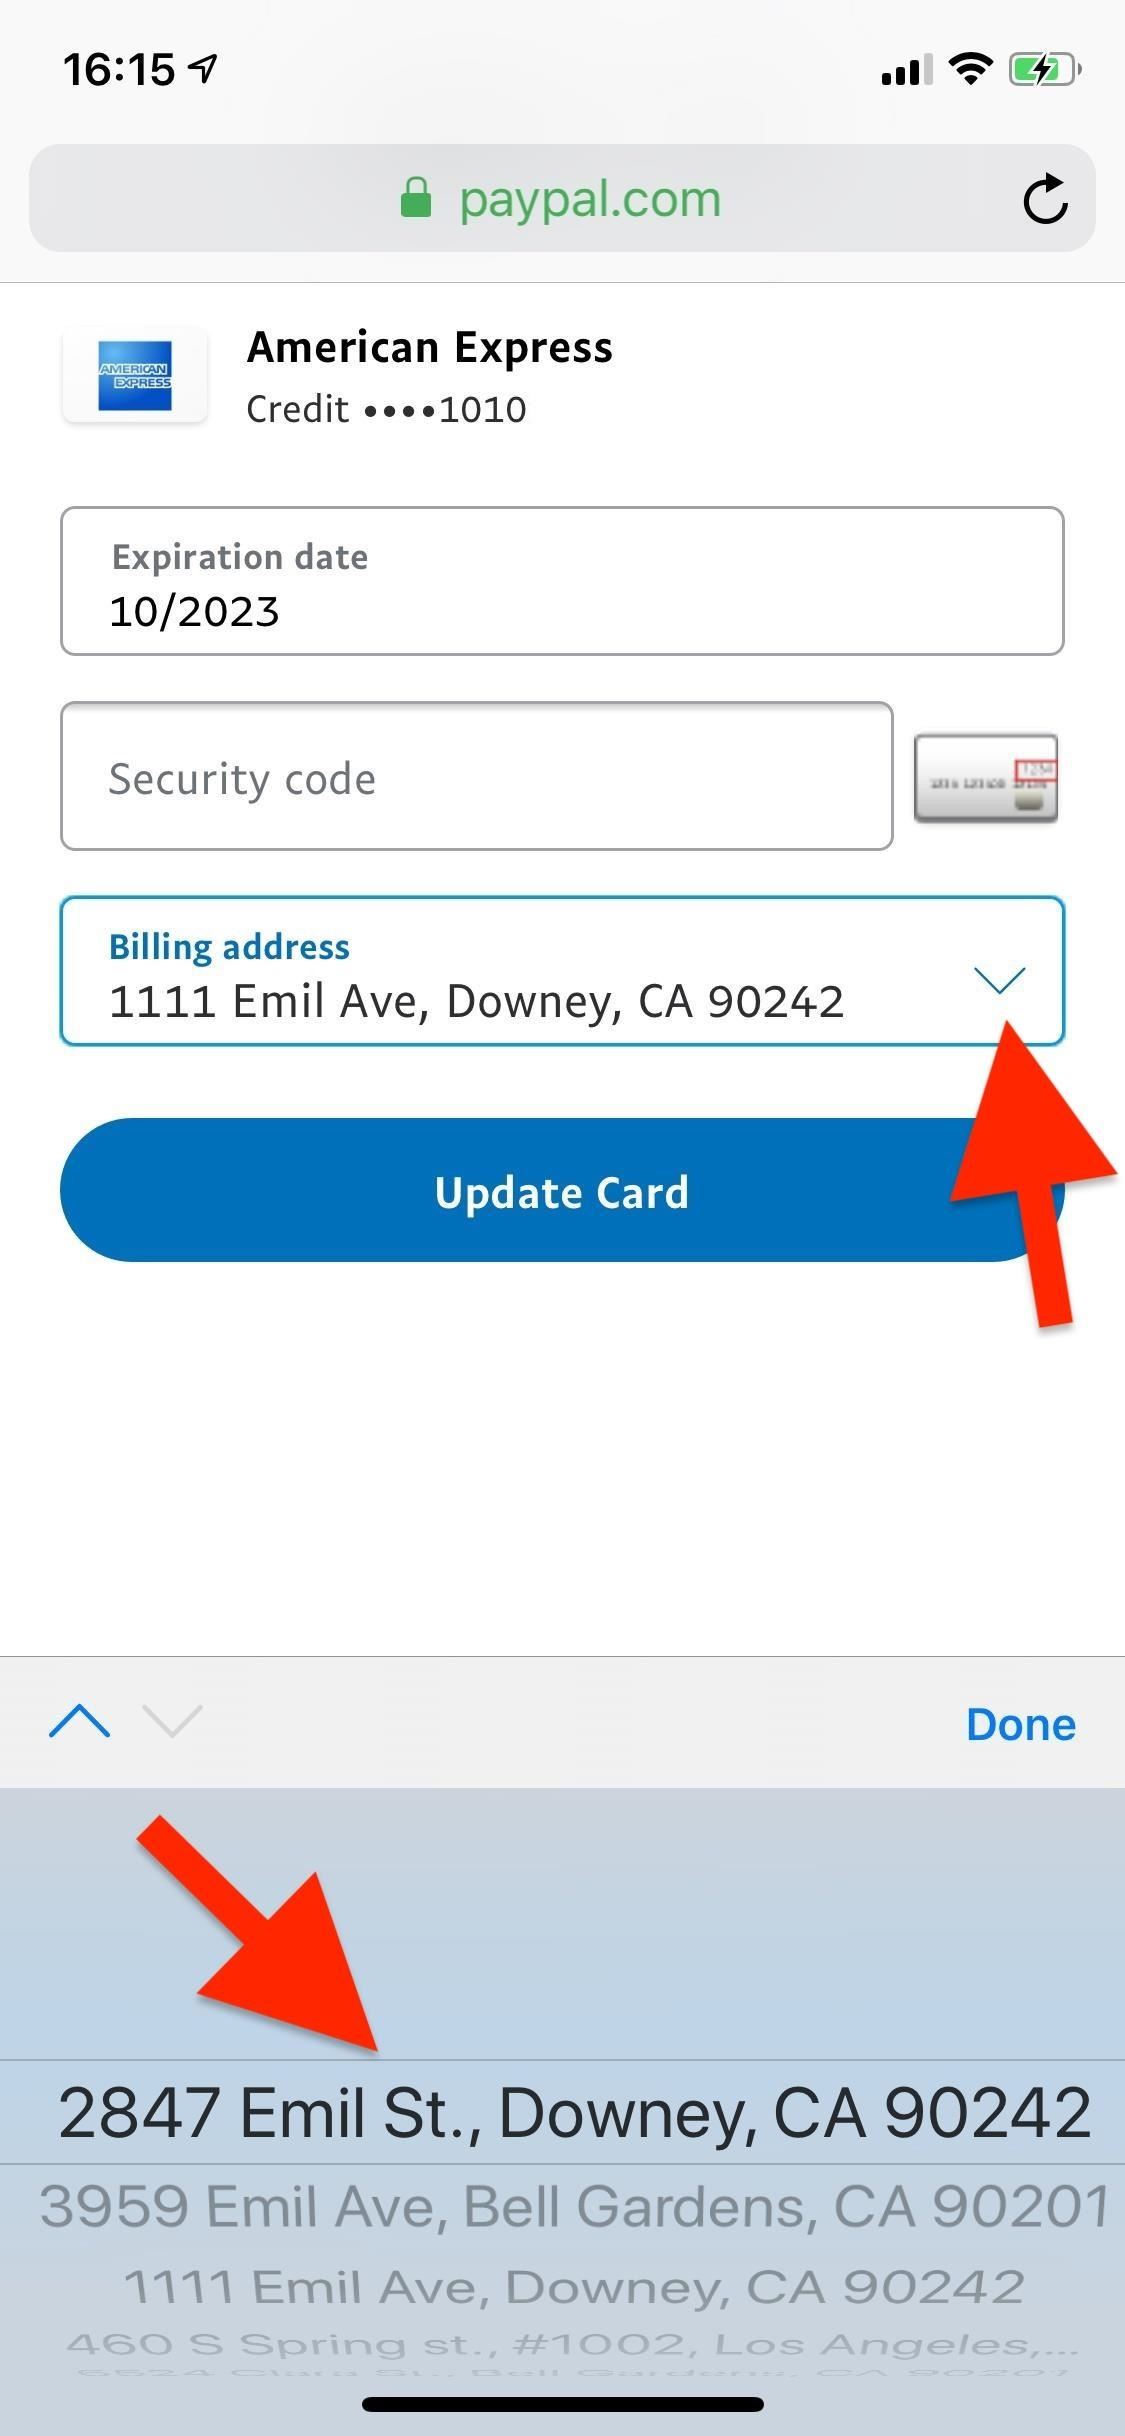 How to Change Your Primary Shipping & Billing Addresses on PayPal to Avoid Purchasing Mishaps